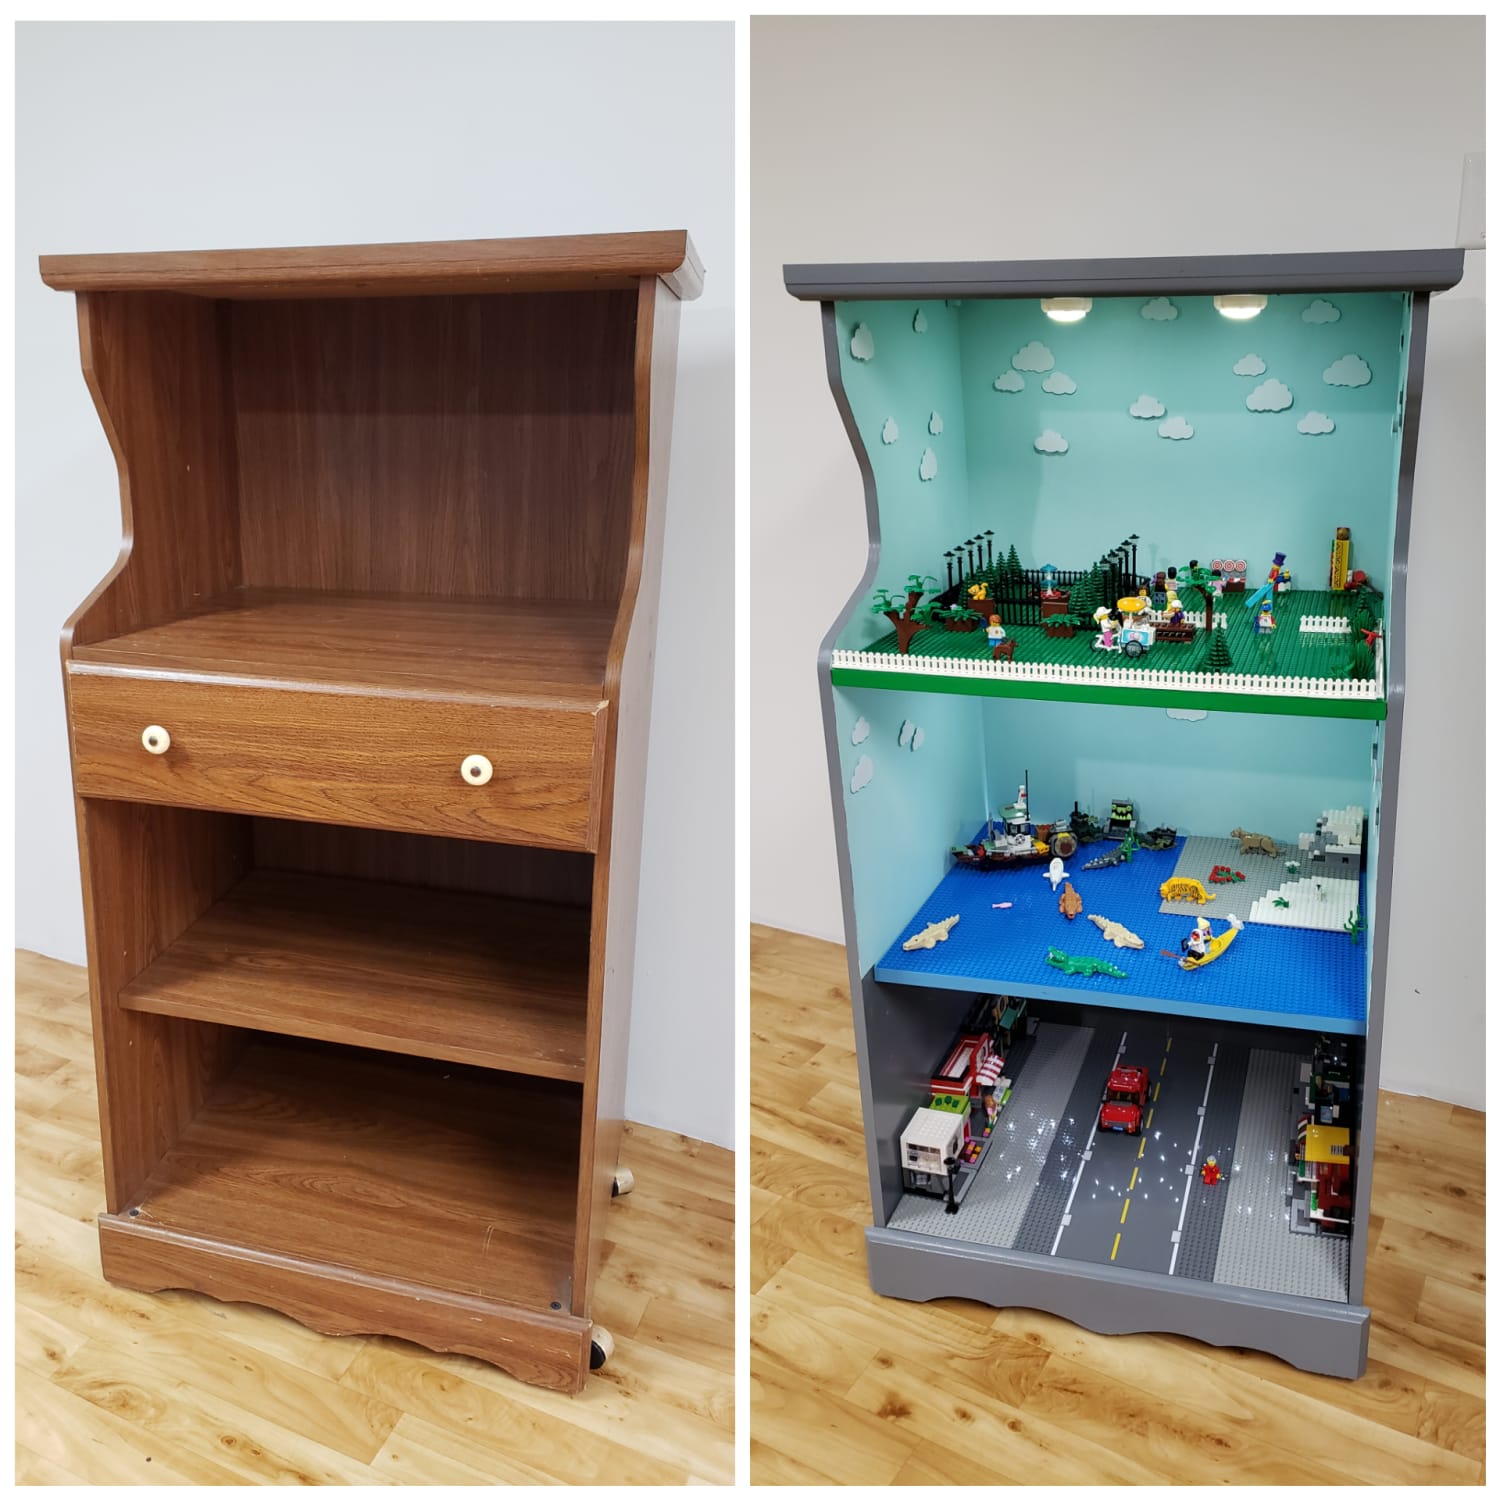 I turned an old microwave cart into a rolling Lego stand for my daughters for Christmas.